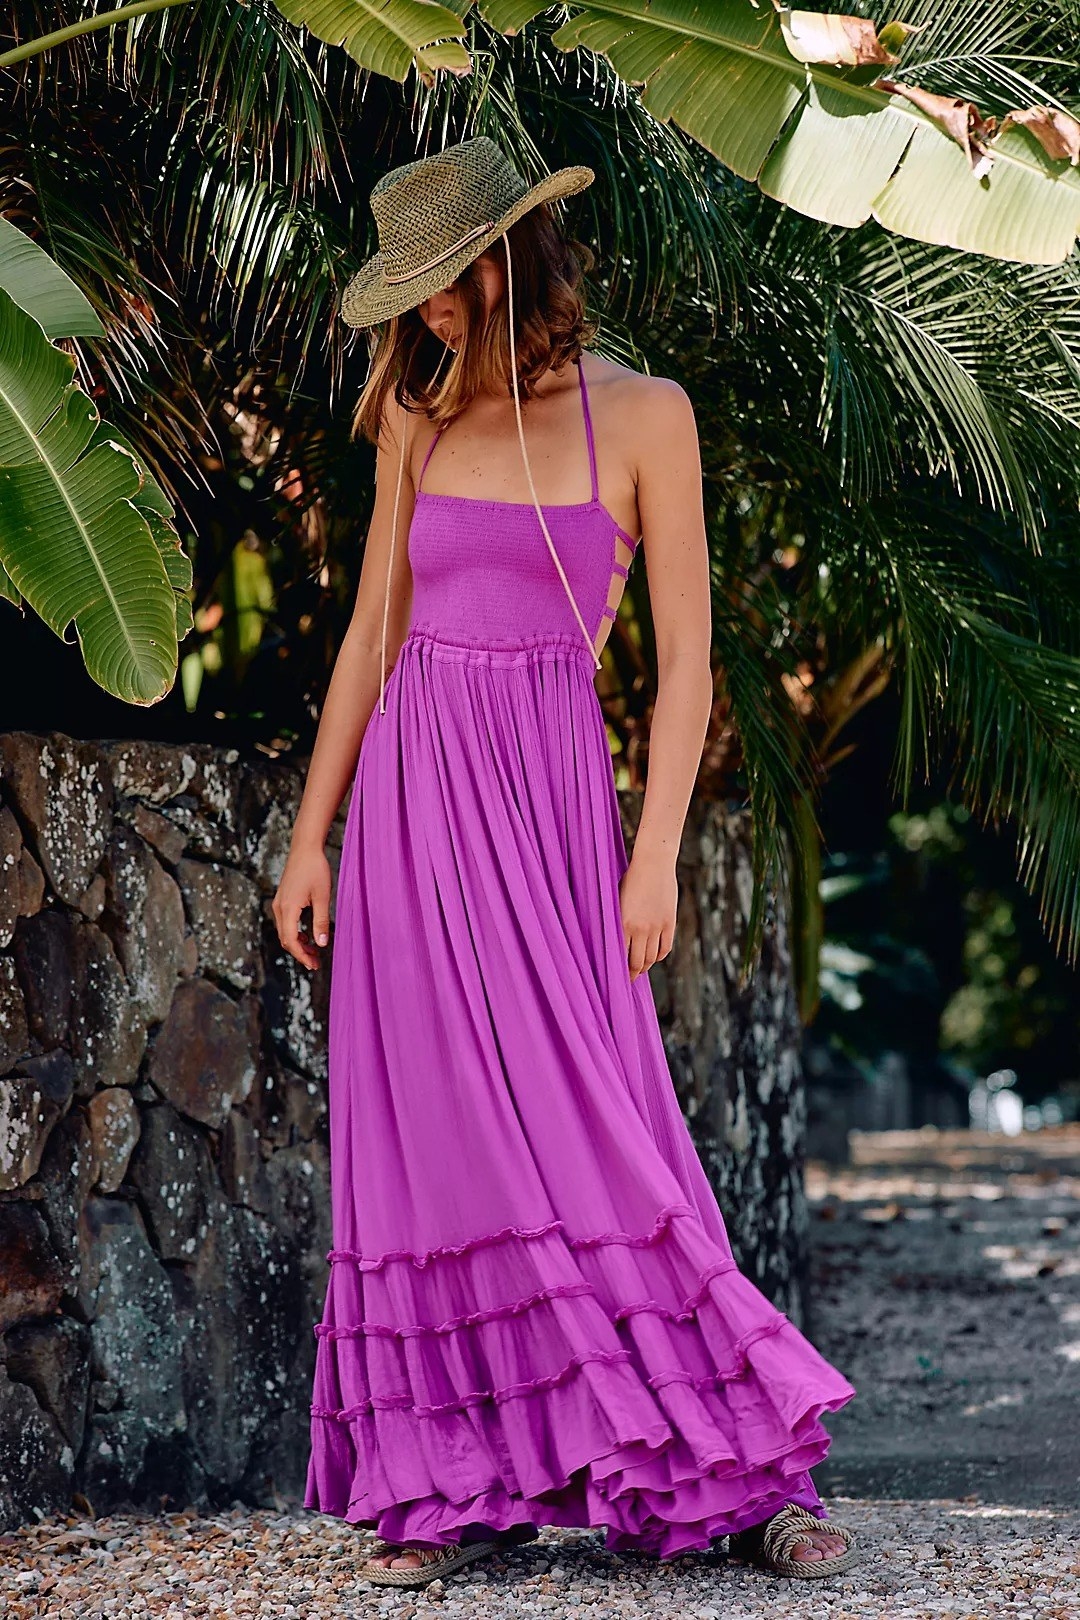 Model wearing purple maxi dress with smocked bodice and tie straps